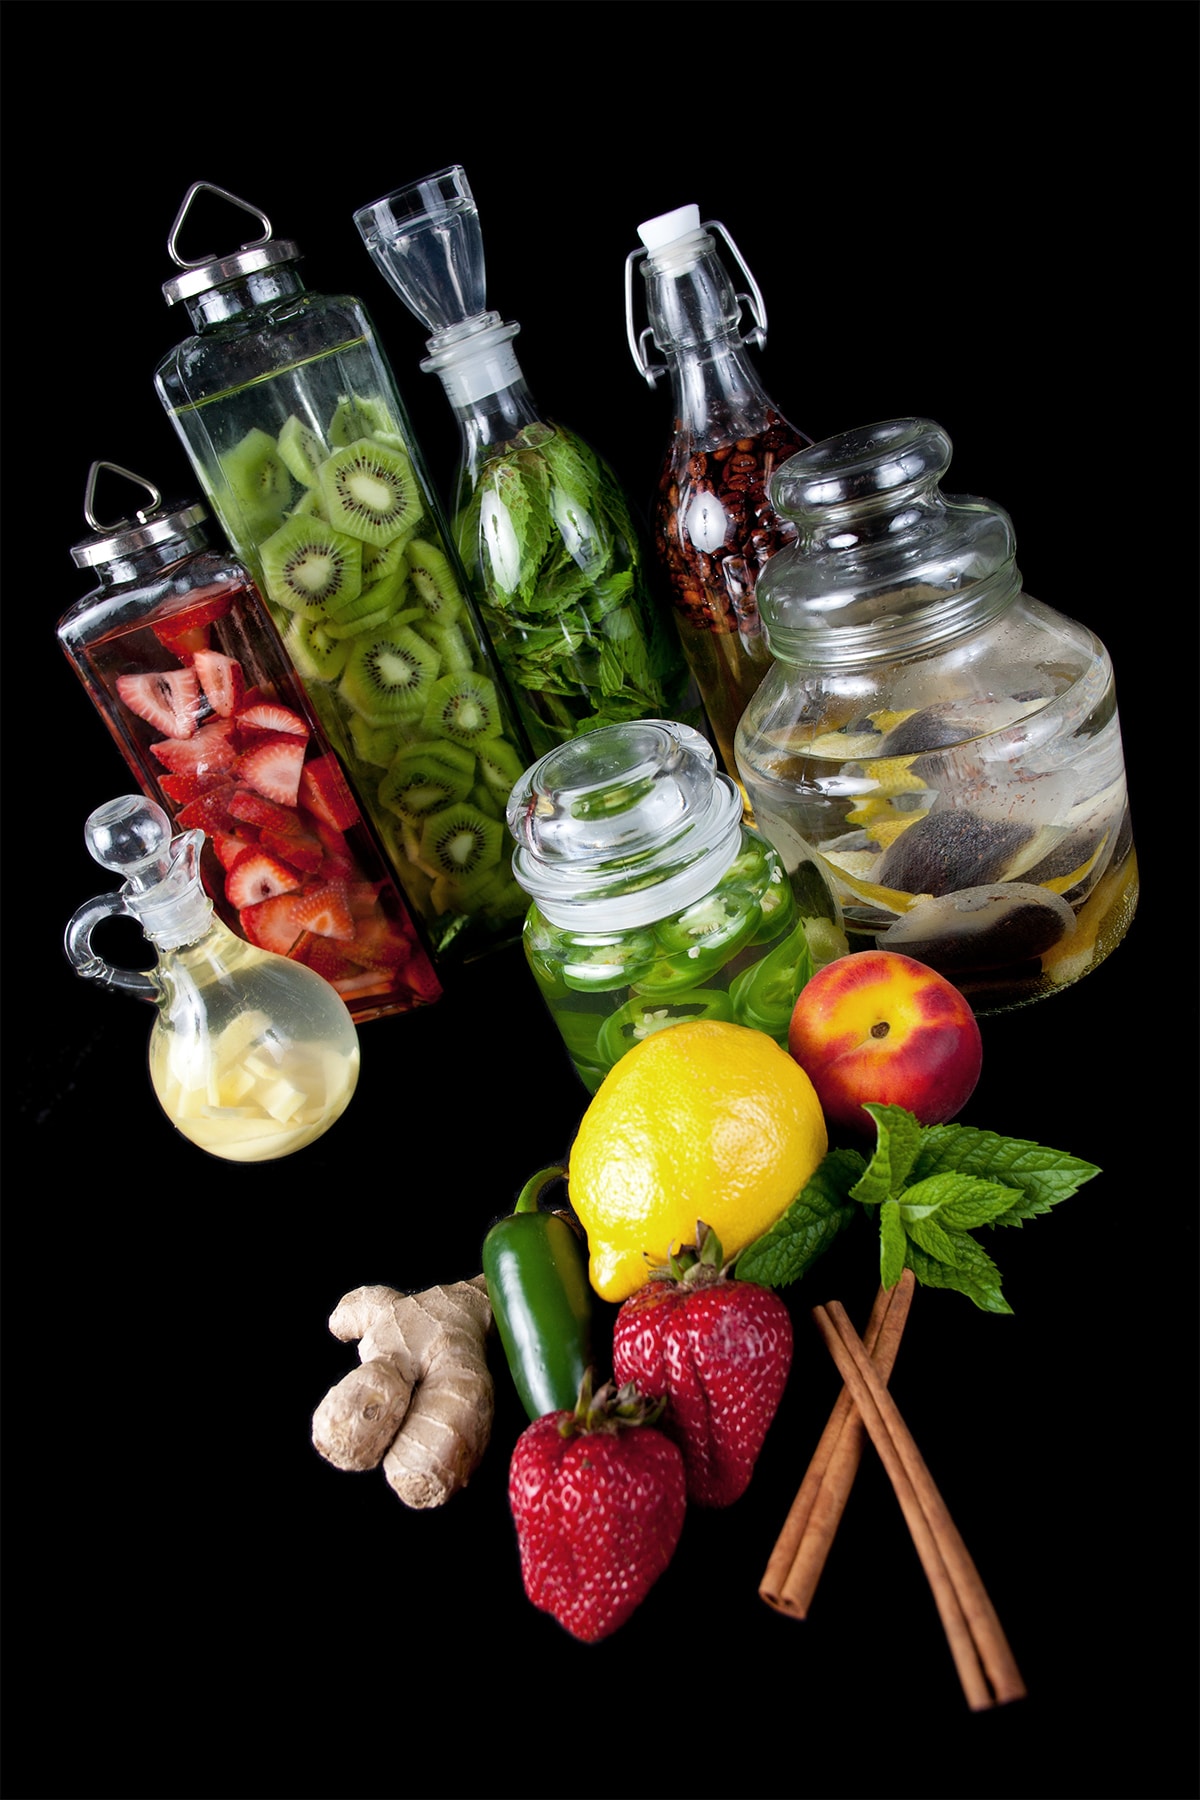 Several glass jars filled with different ingredients steeping in vodka.  Cinnamon, coffee, strawberries, lemon, ginger, iced tea, and more.